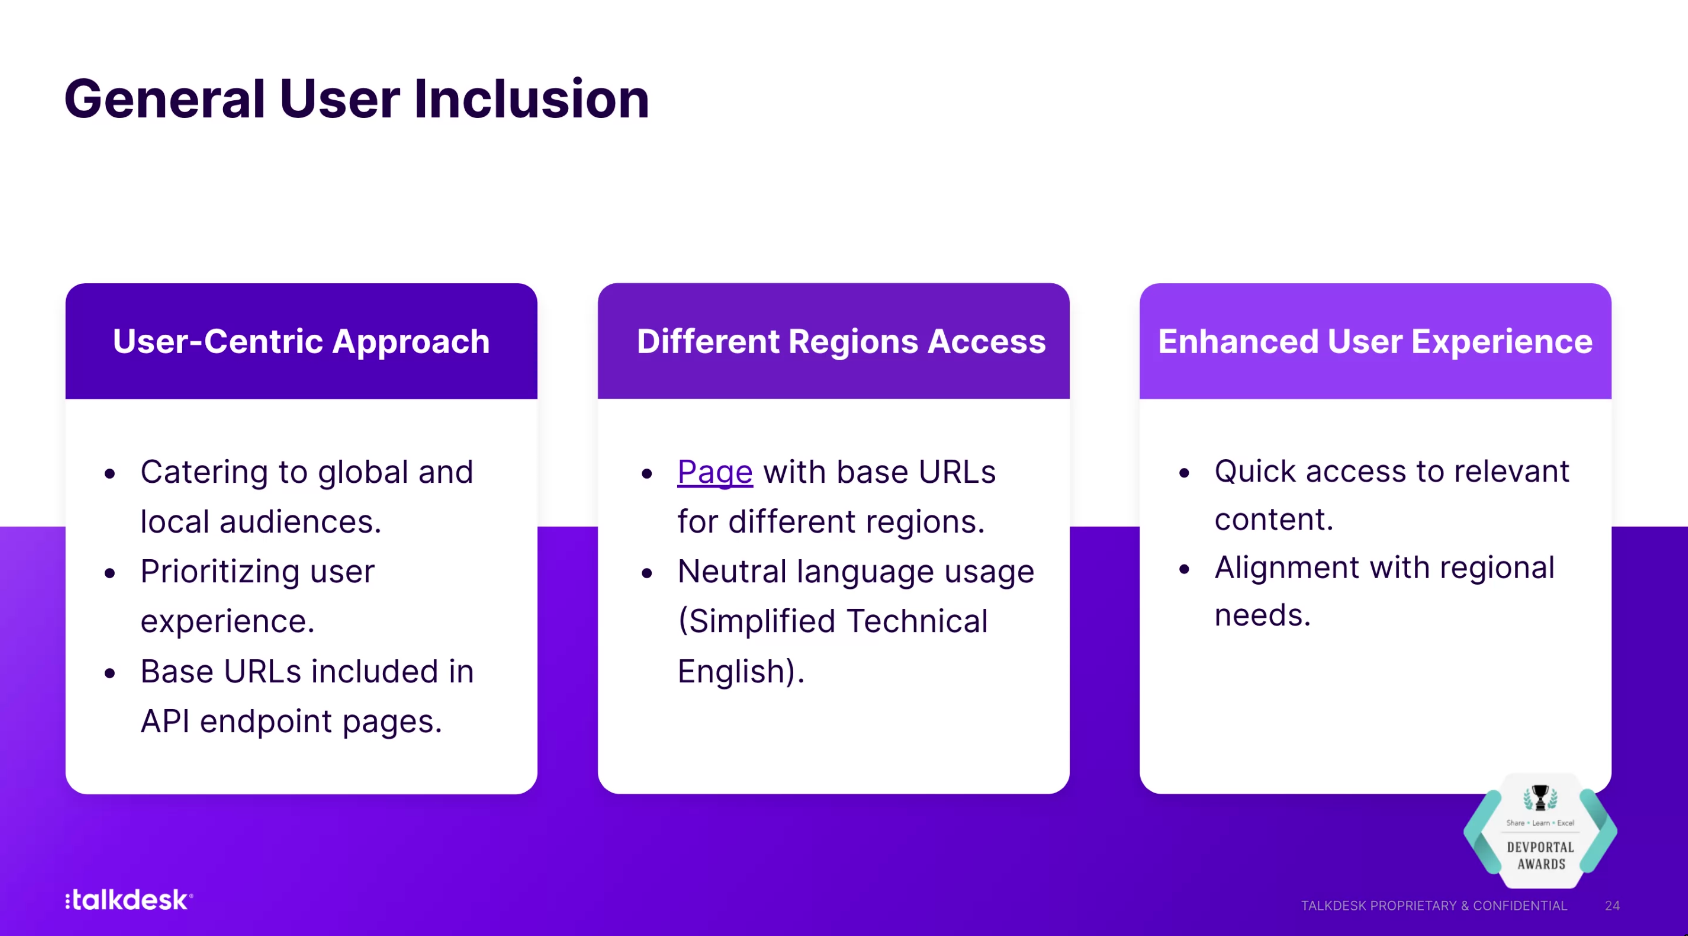 General User Inclusion: 1. User-centric approach: catering to global and local audience. Prioritizing user experience. Base URLs included in  API endpoint pages 2. Different Region Access: Page base URLs for different regions. Neutral language usage (Simplified Technical English). 3. Enhanced User Experience: Quick access to relevant content. Alignment with regional needs. 